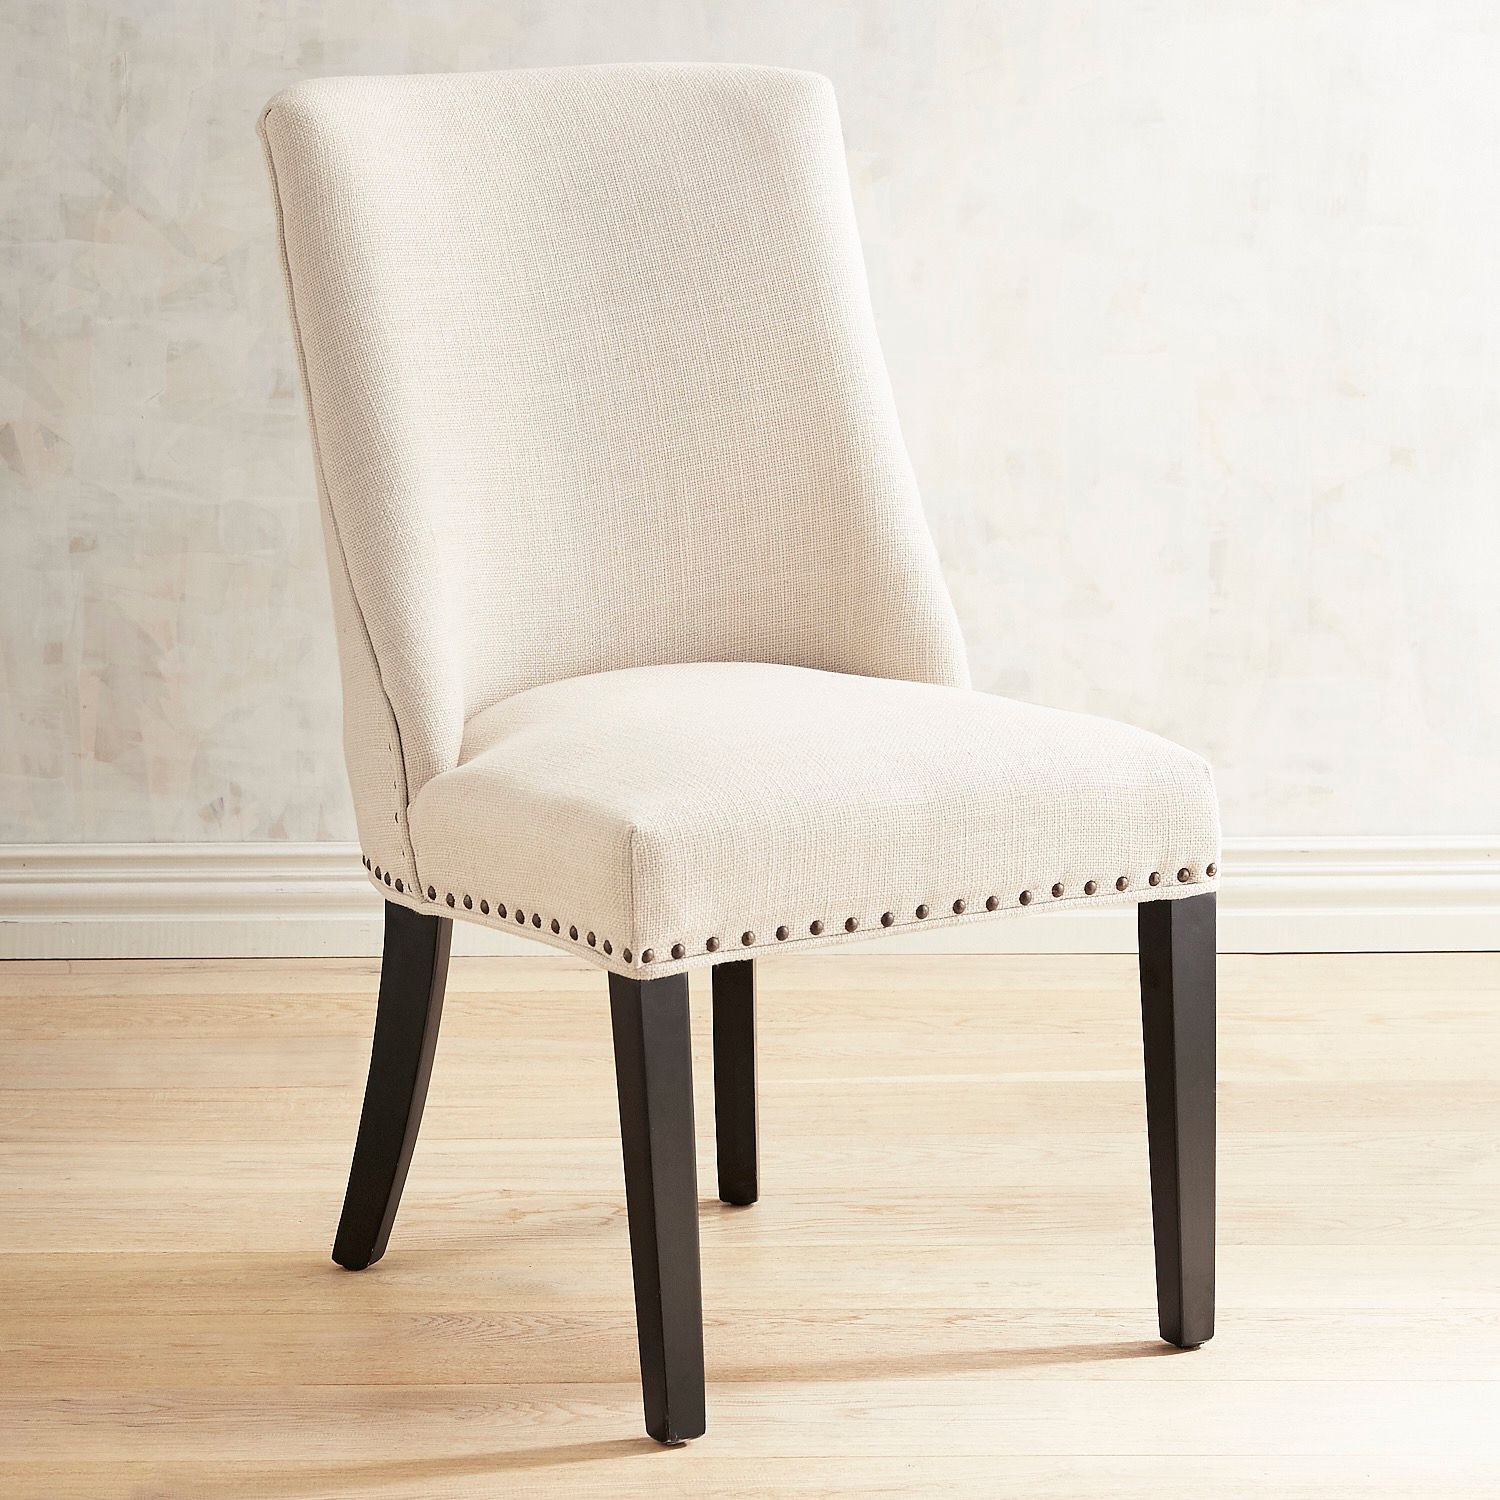 Corinne Linen Dining Chair with Black Espresso Wood | Pier 1